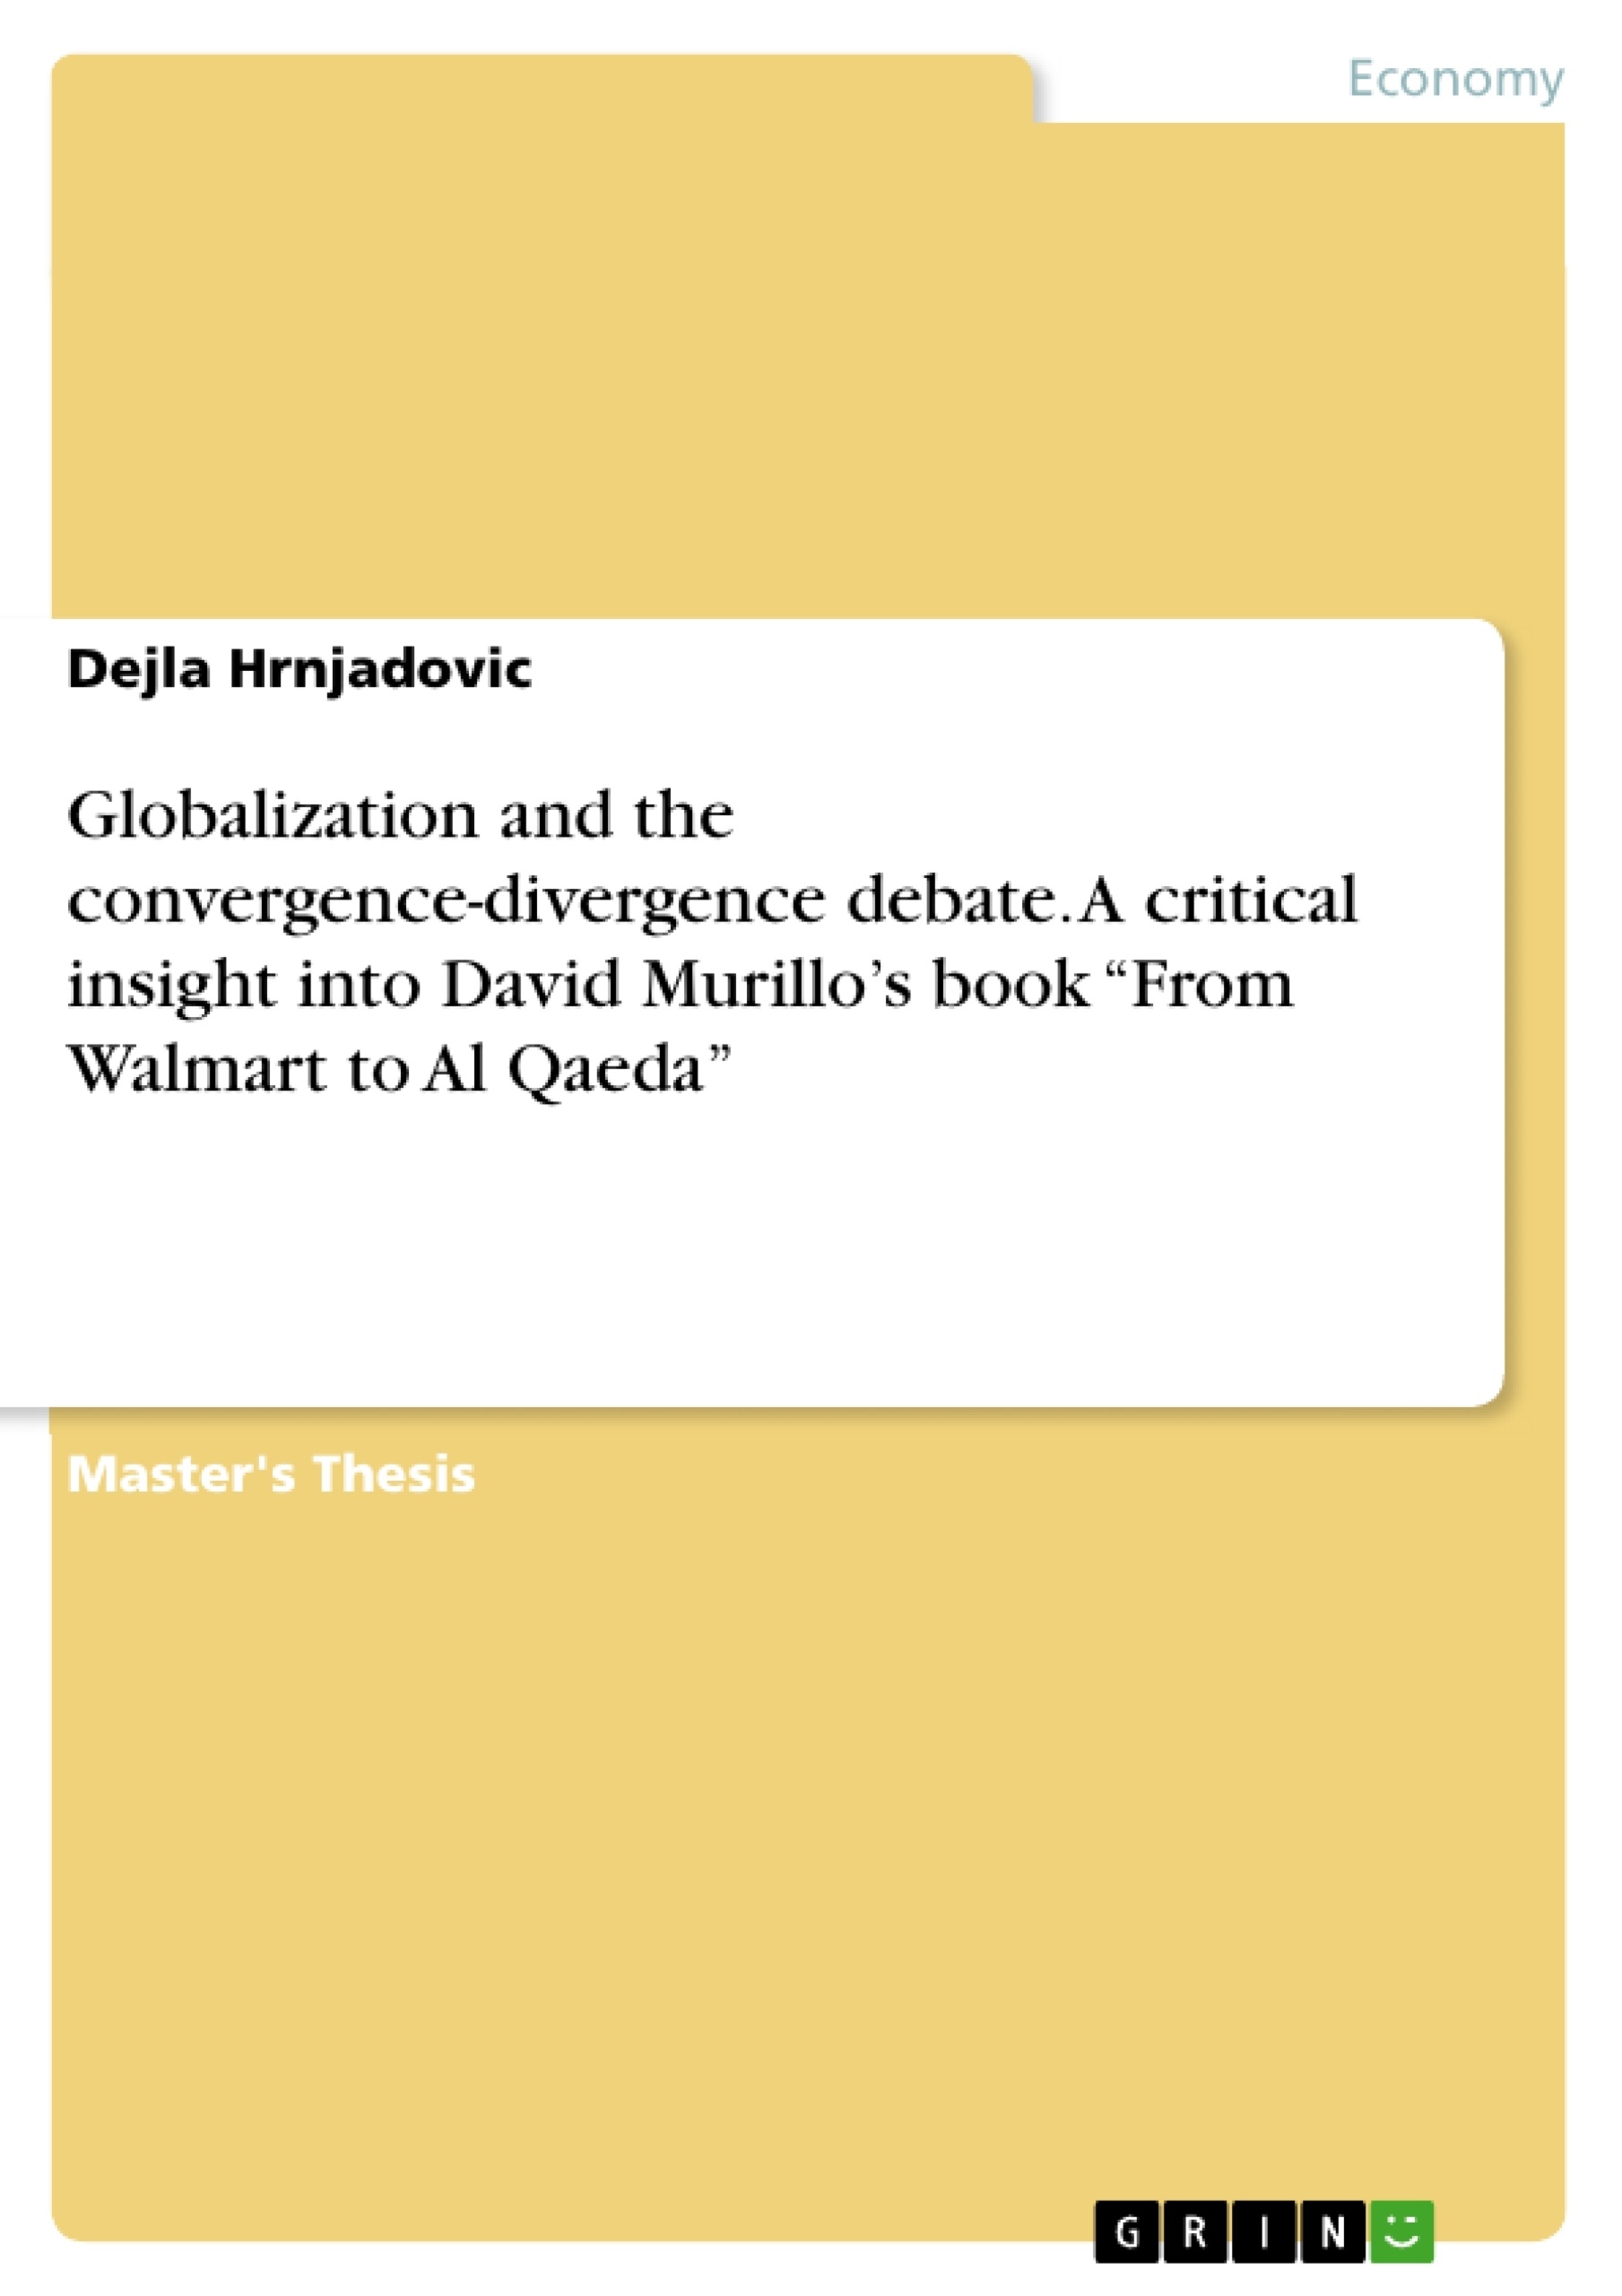 Titre: Globalization and the convergence-divergence debate. A critical insight into David Murillo’s book “From Walmart to Al Qaeda”